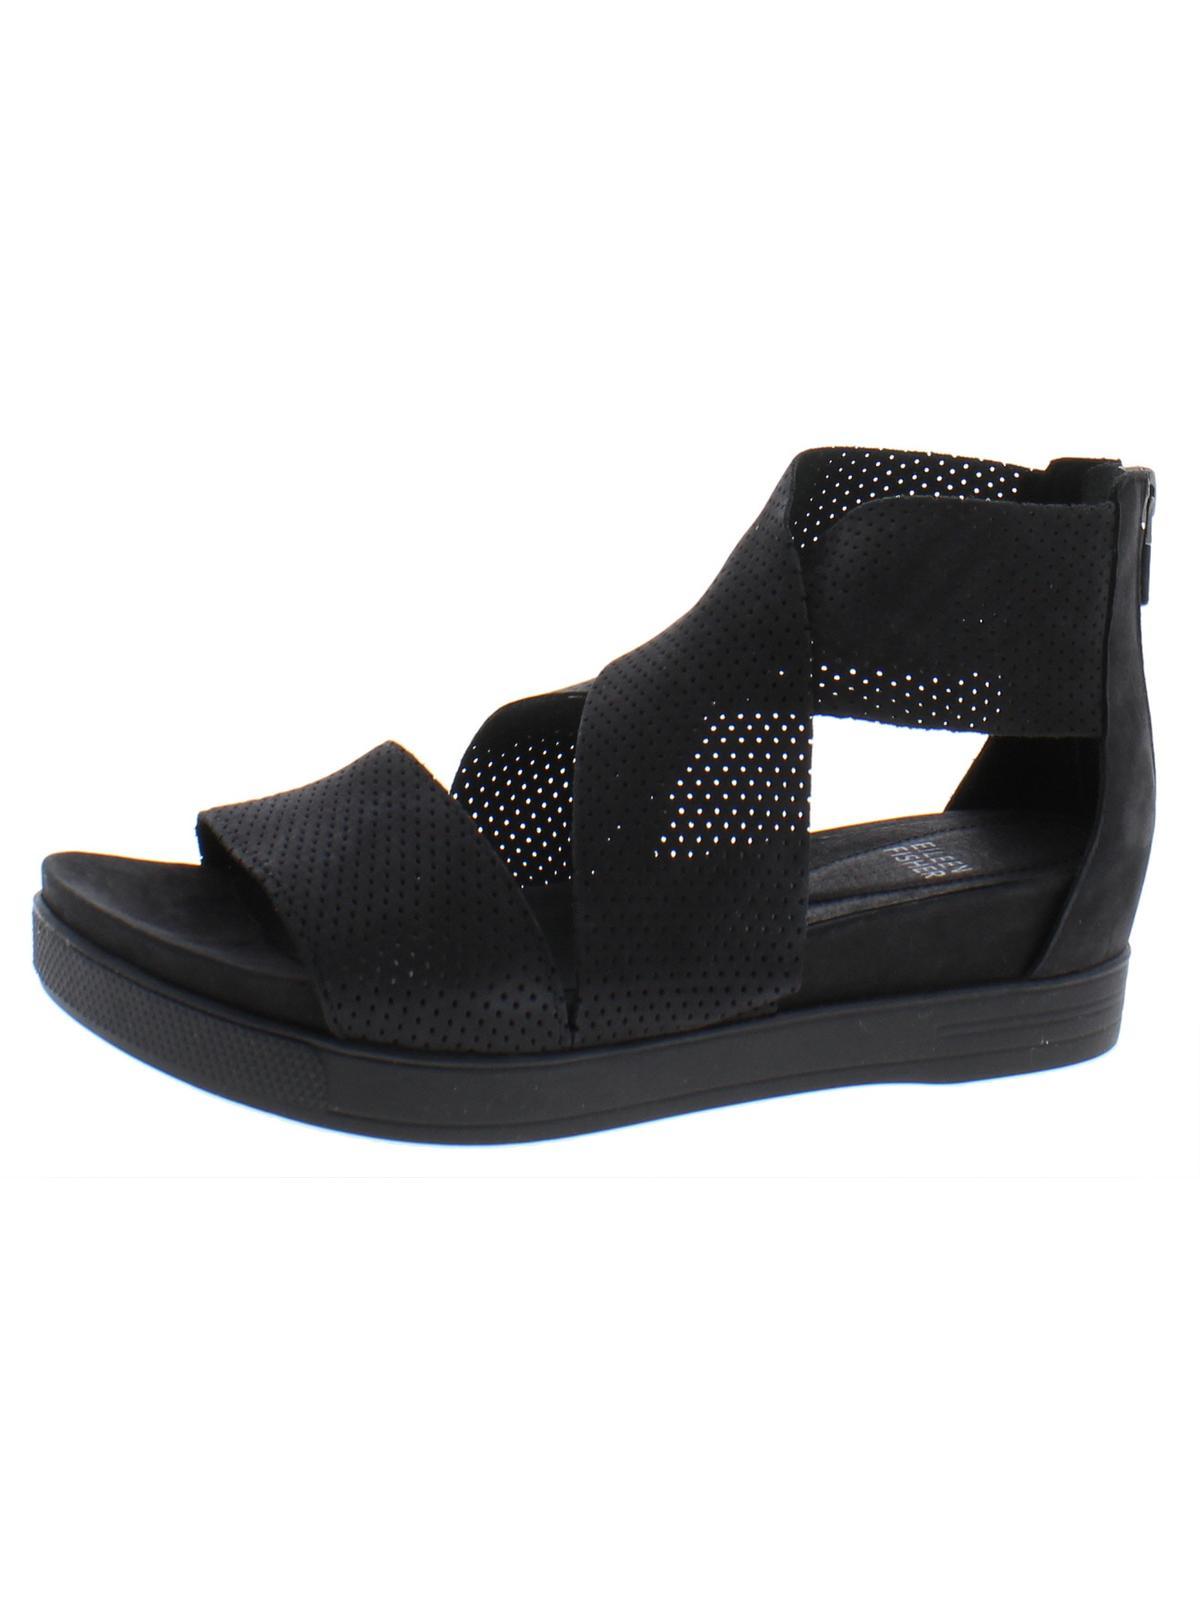 Eileen Fisher Sport 3 Nubuck Perforated Gladiator Sandals in Black | Lyst